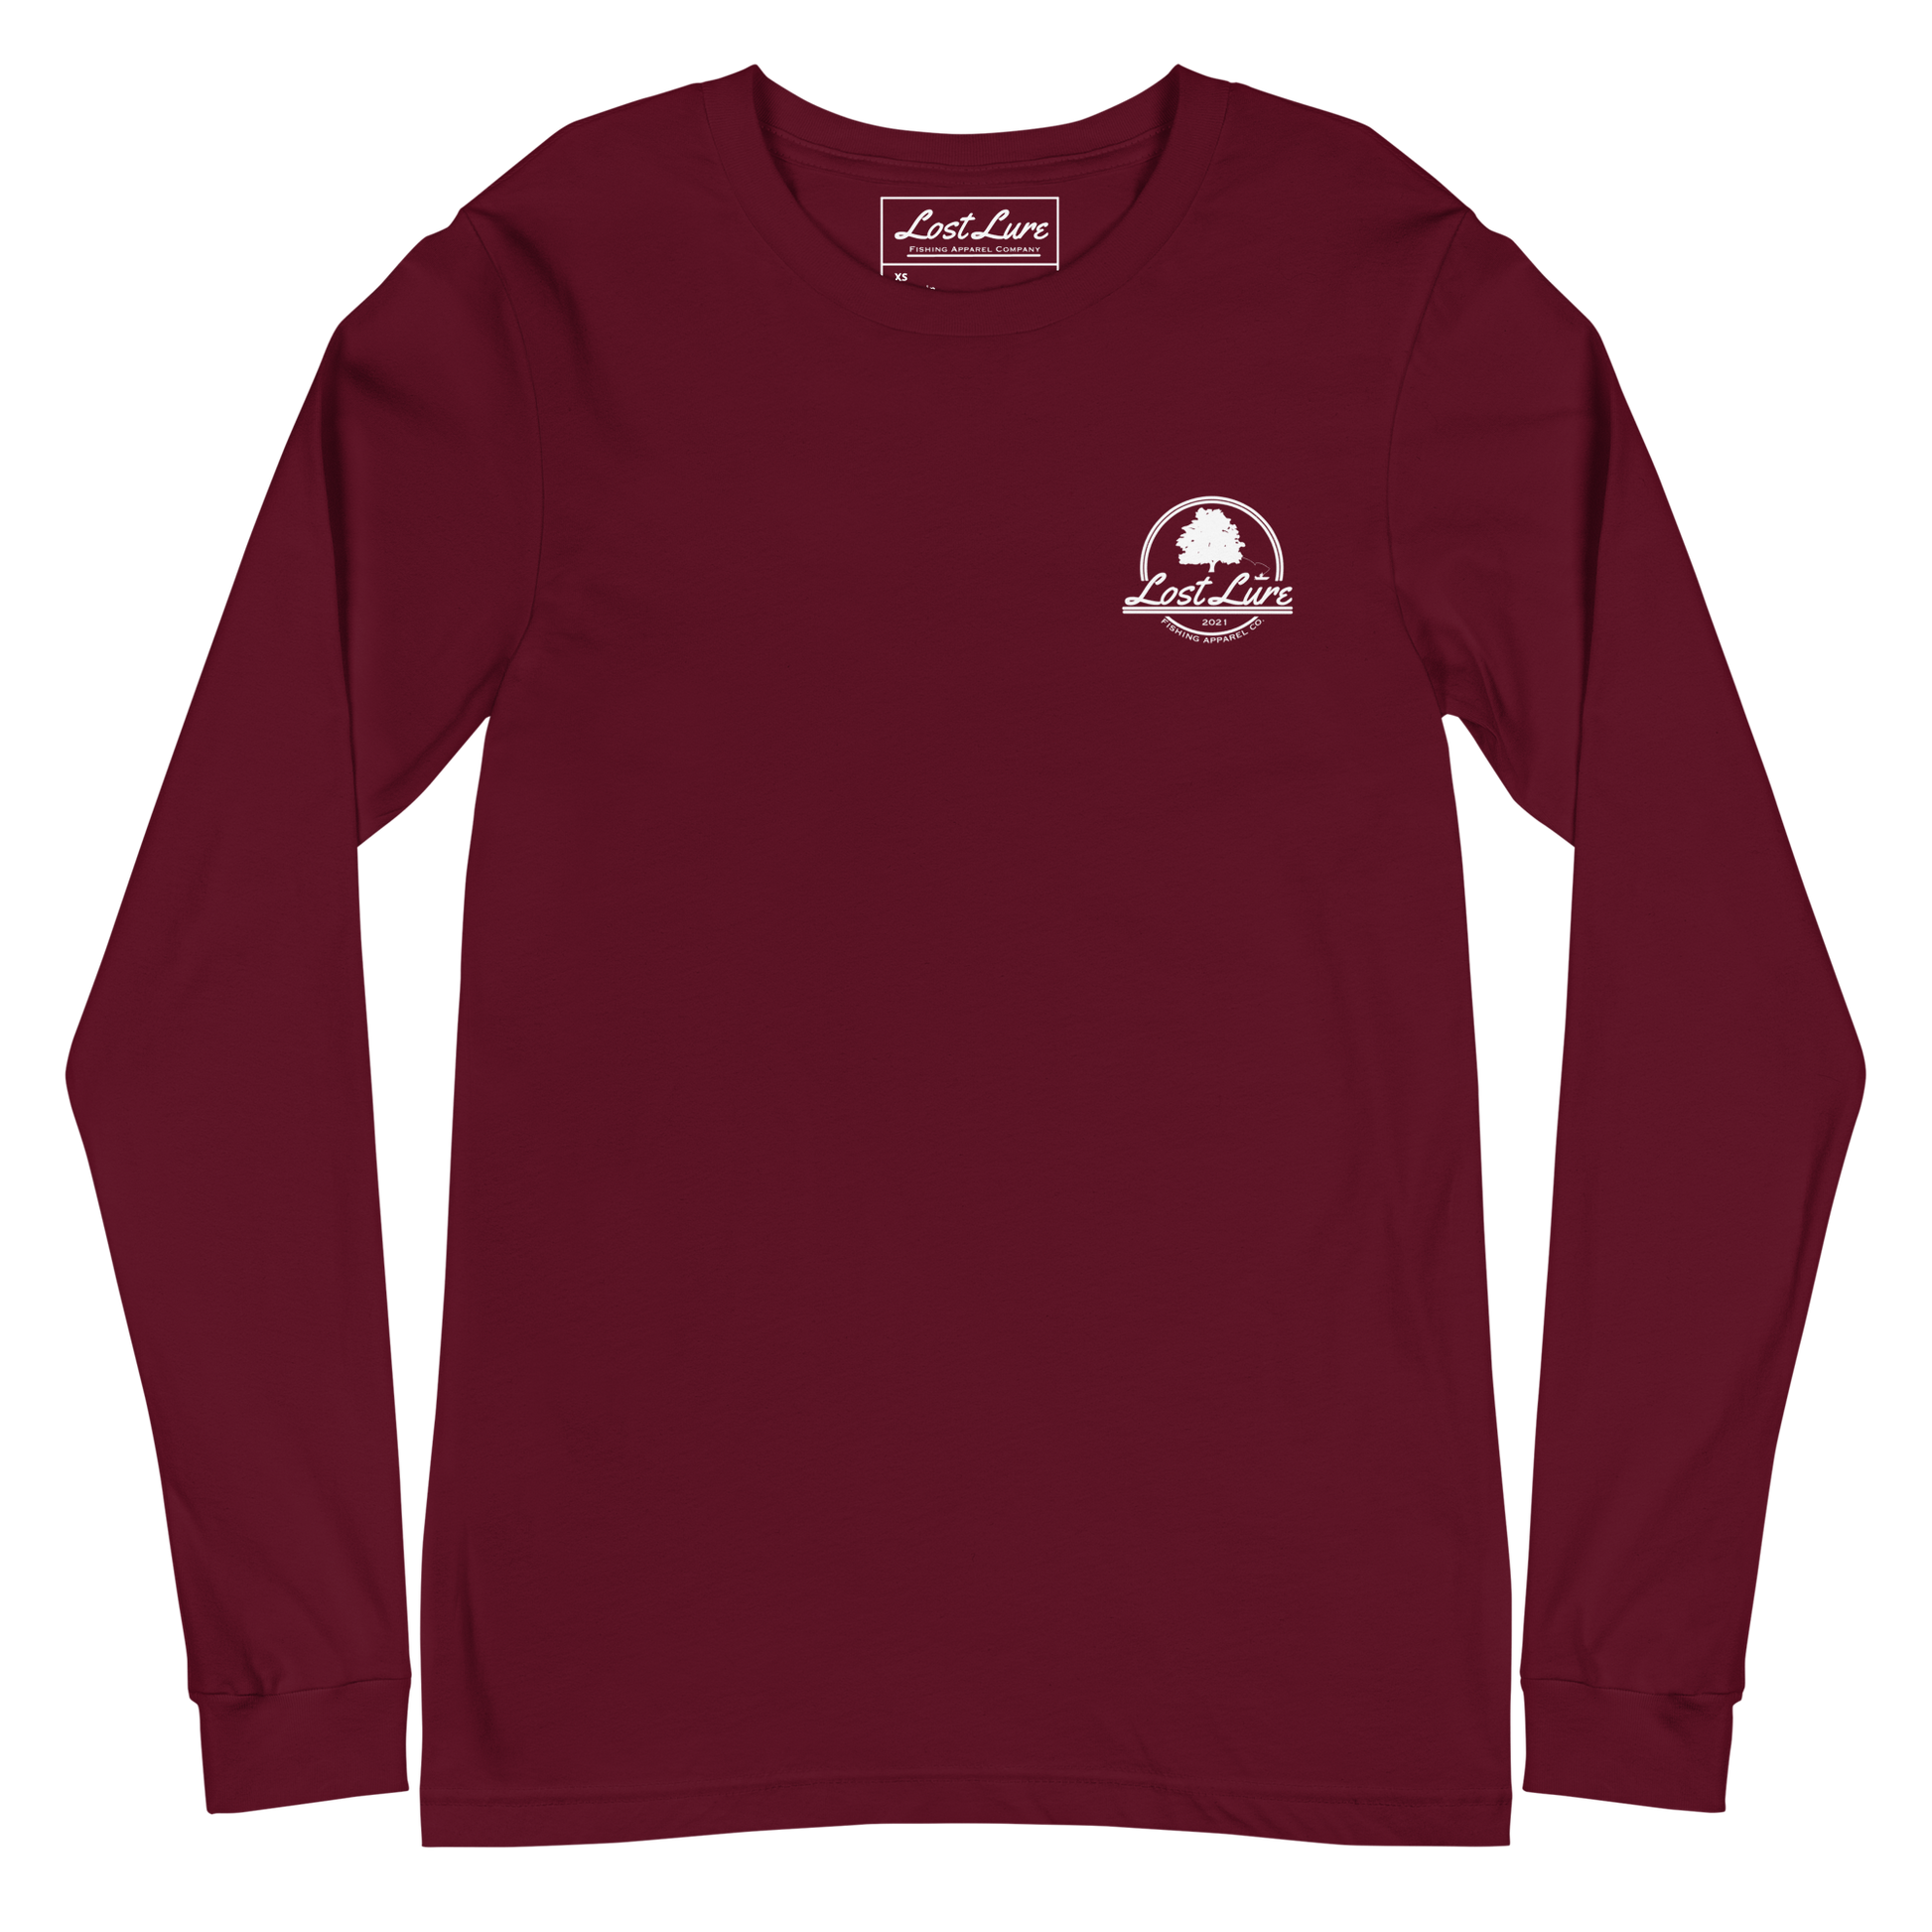 Fly fishing Lost lure long sleeve shirt. It has a design on the back of the shirt black and white outline a fly fisherman and the Rocky Mountains. Maroon fishing shirt, front side